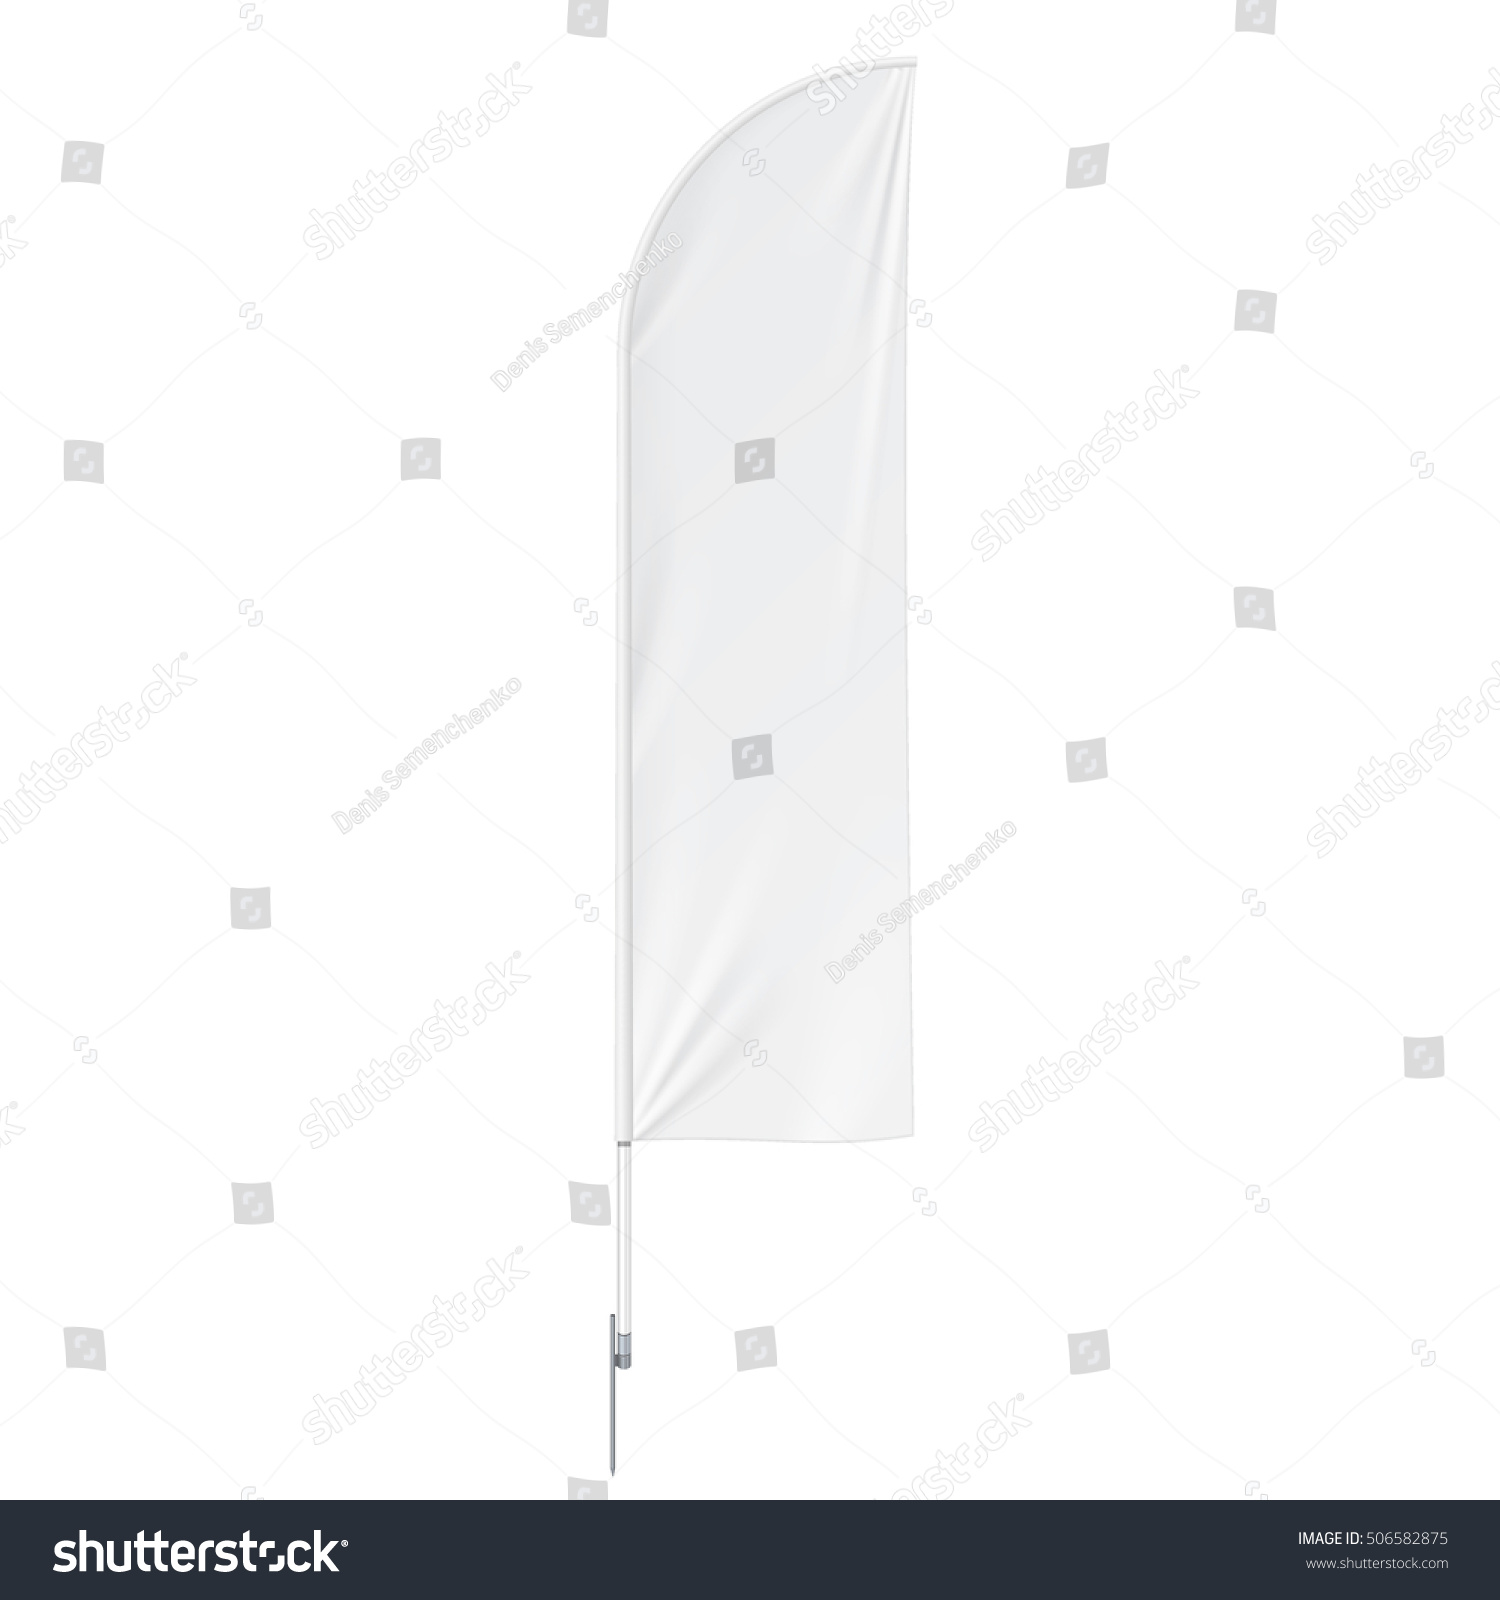 Outdoor Feather Flag With Ground Spike, Stander Banner Shield. Mock Up On White Background Isolated. Ready For Your Design. Product Advertising. Vector EPS10 #506582875